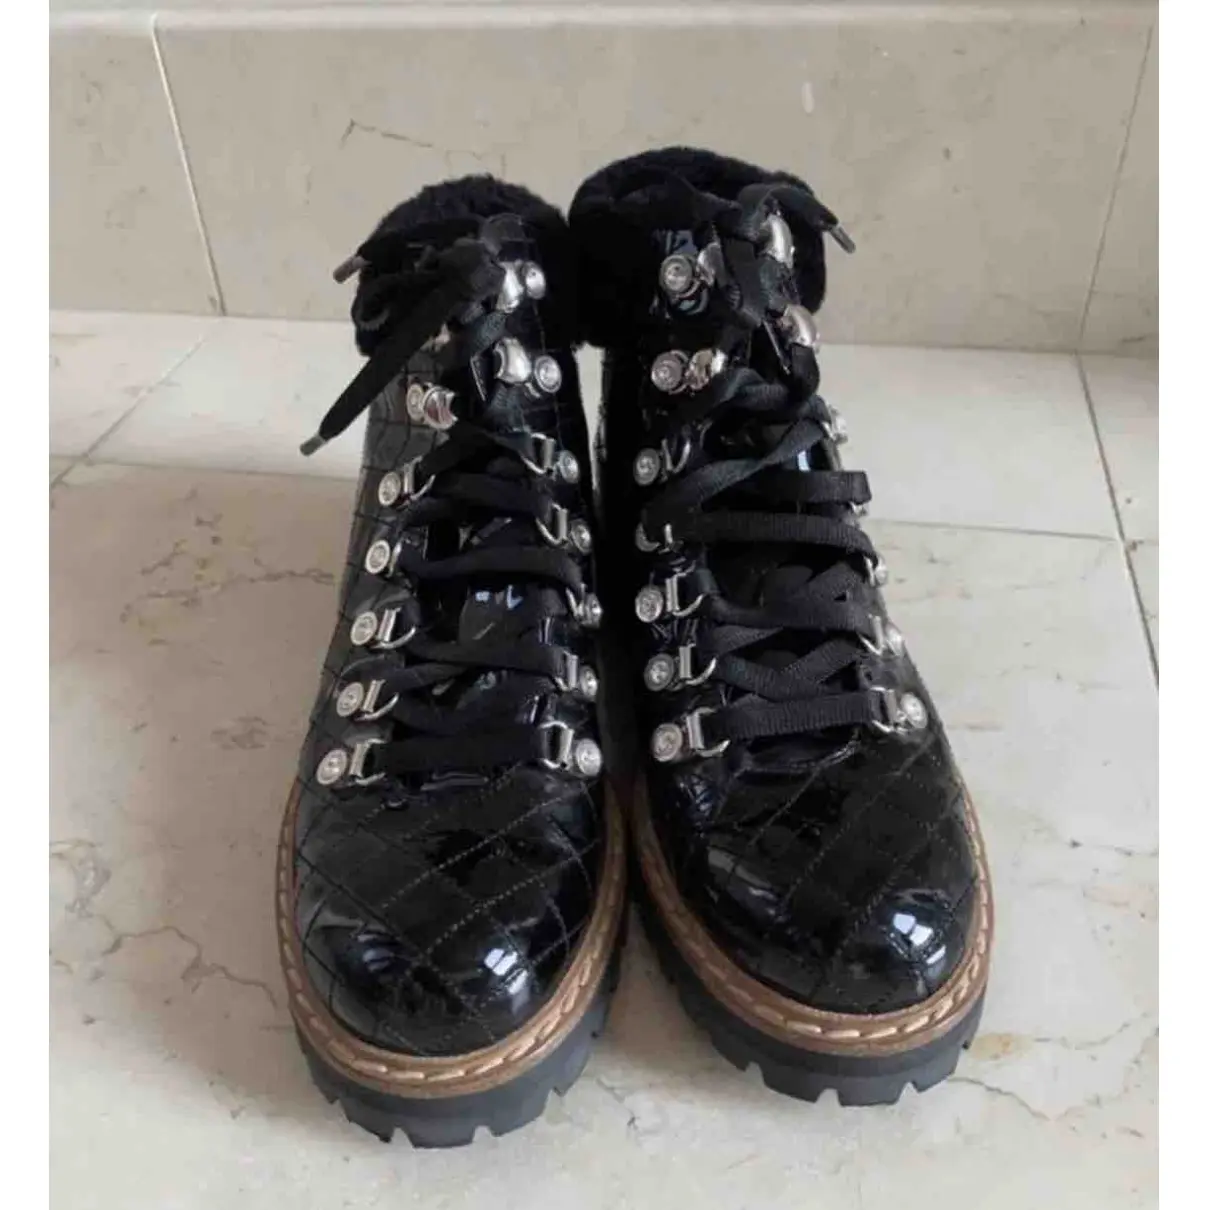 Buy Le Silla Patent leather boots online